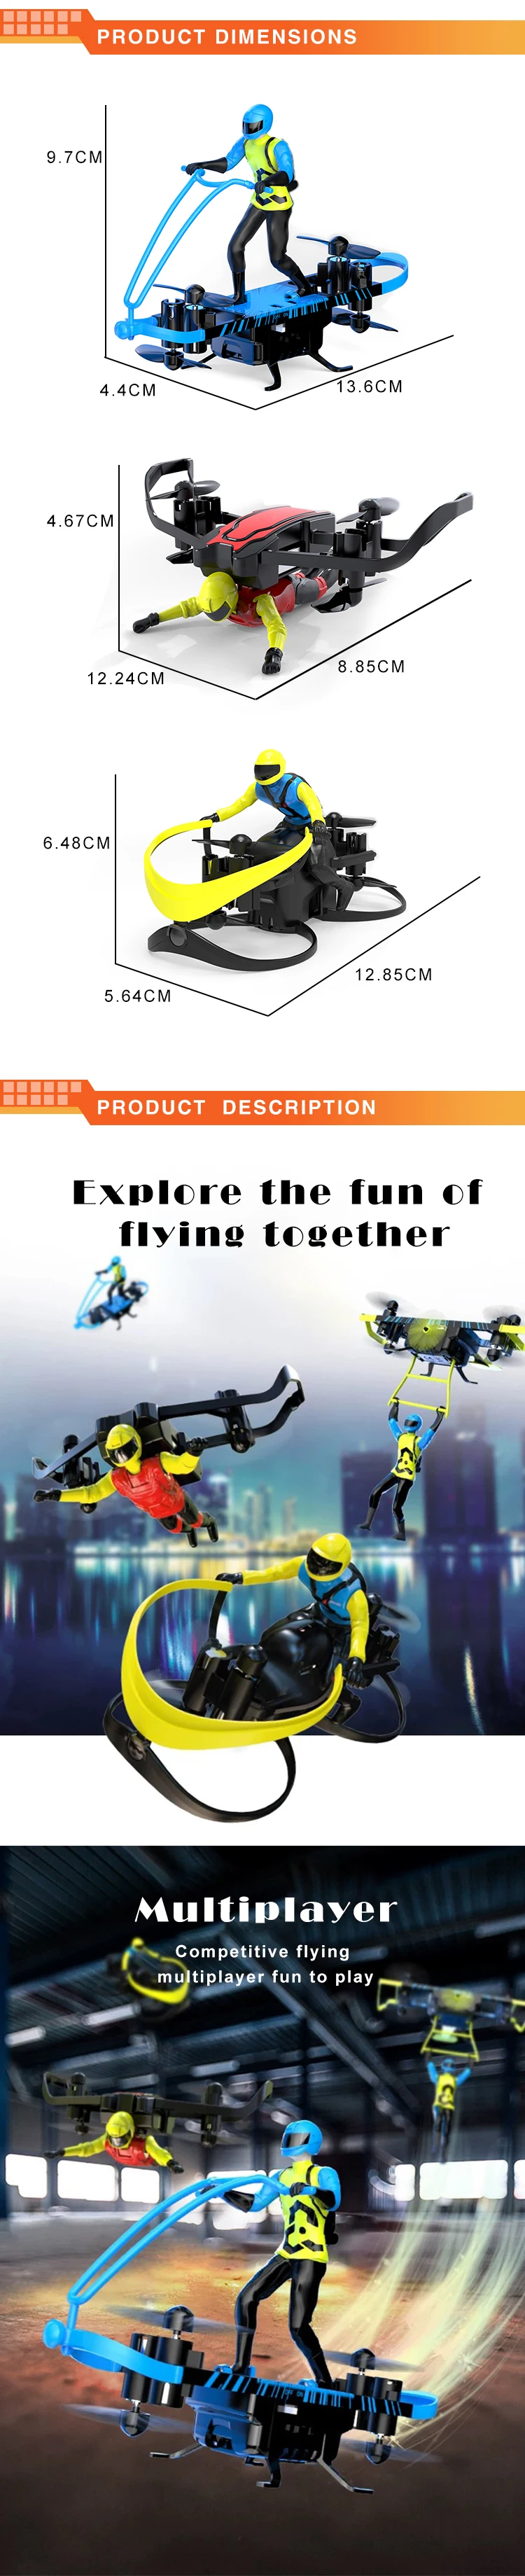 Amazon New products 2.4G quadcopter helicopter toys rc remote control aircraft